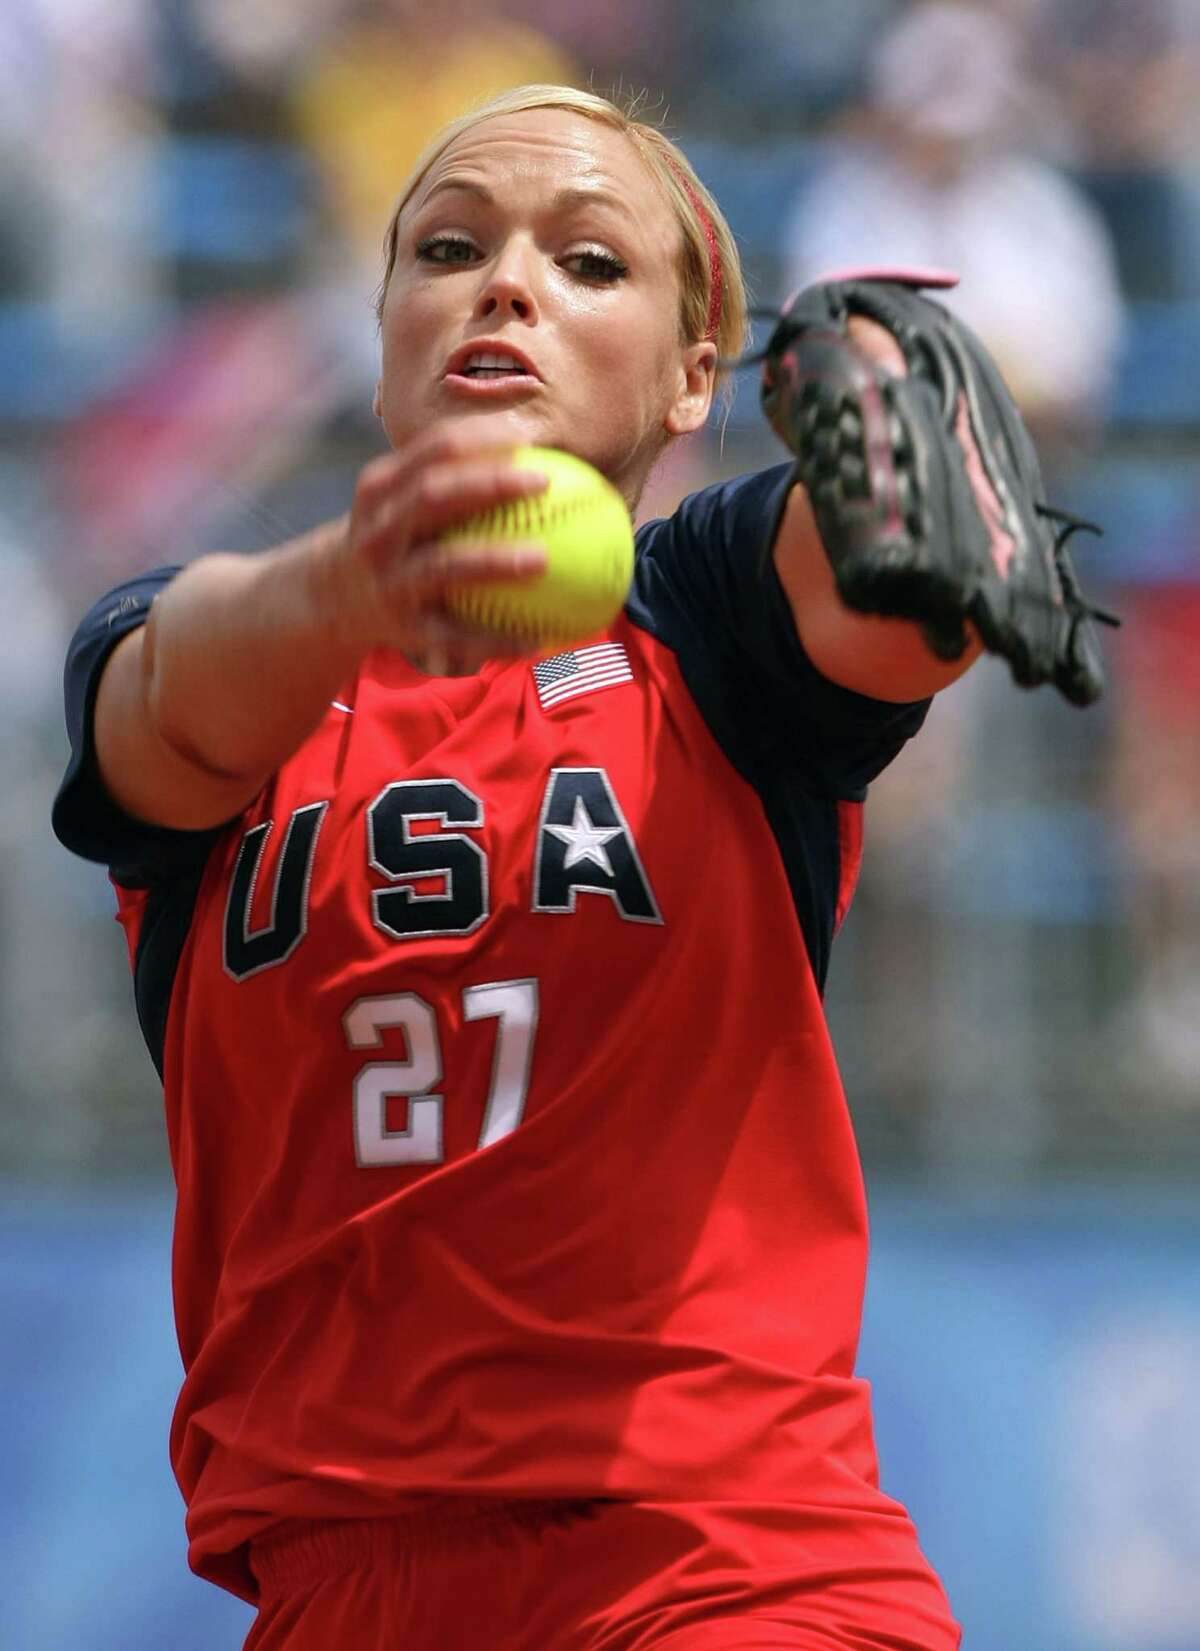 Softball's Jennie Finch to guestmanage Bluefish on May 29